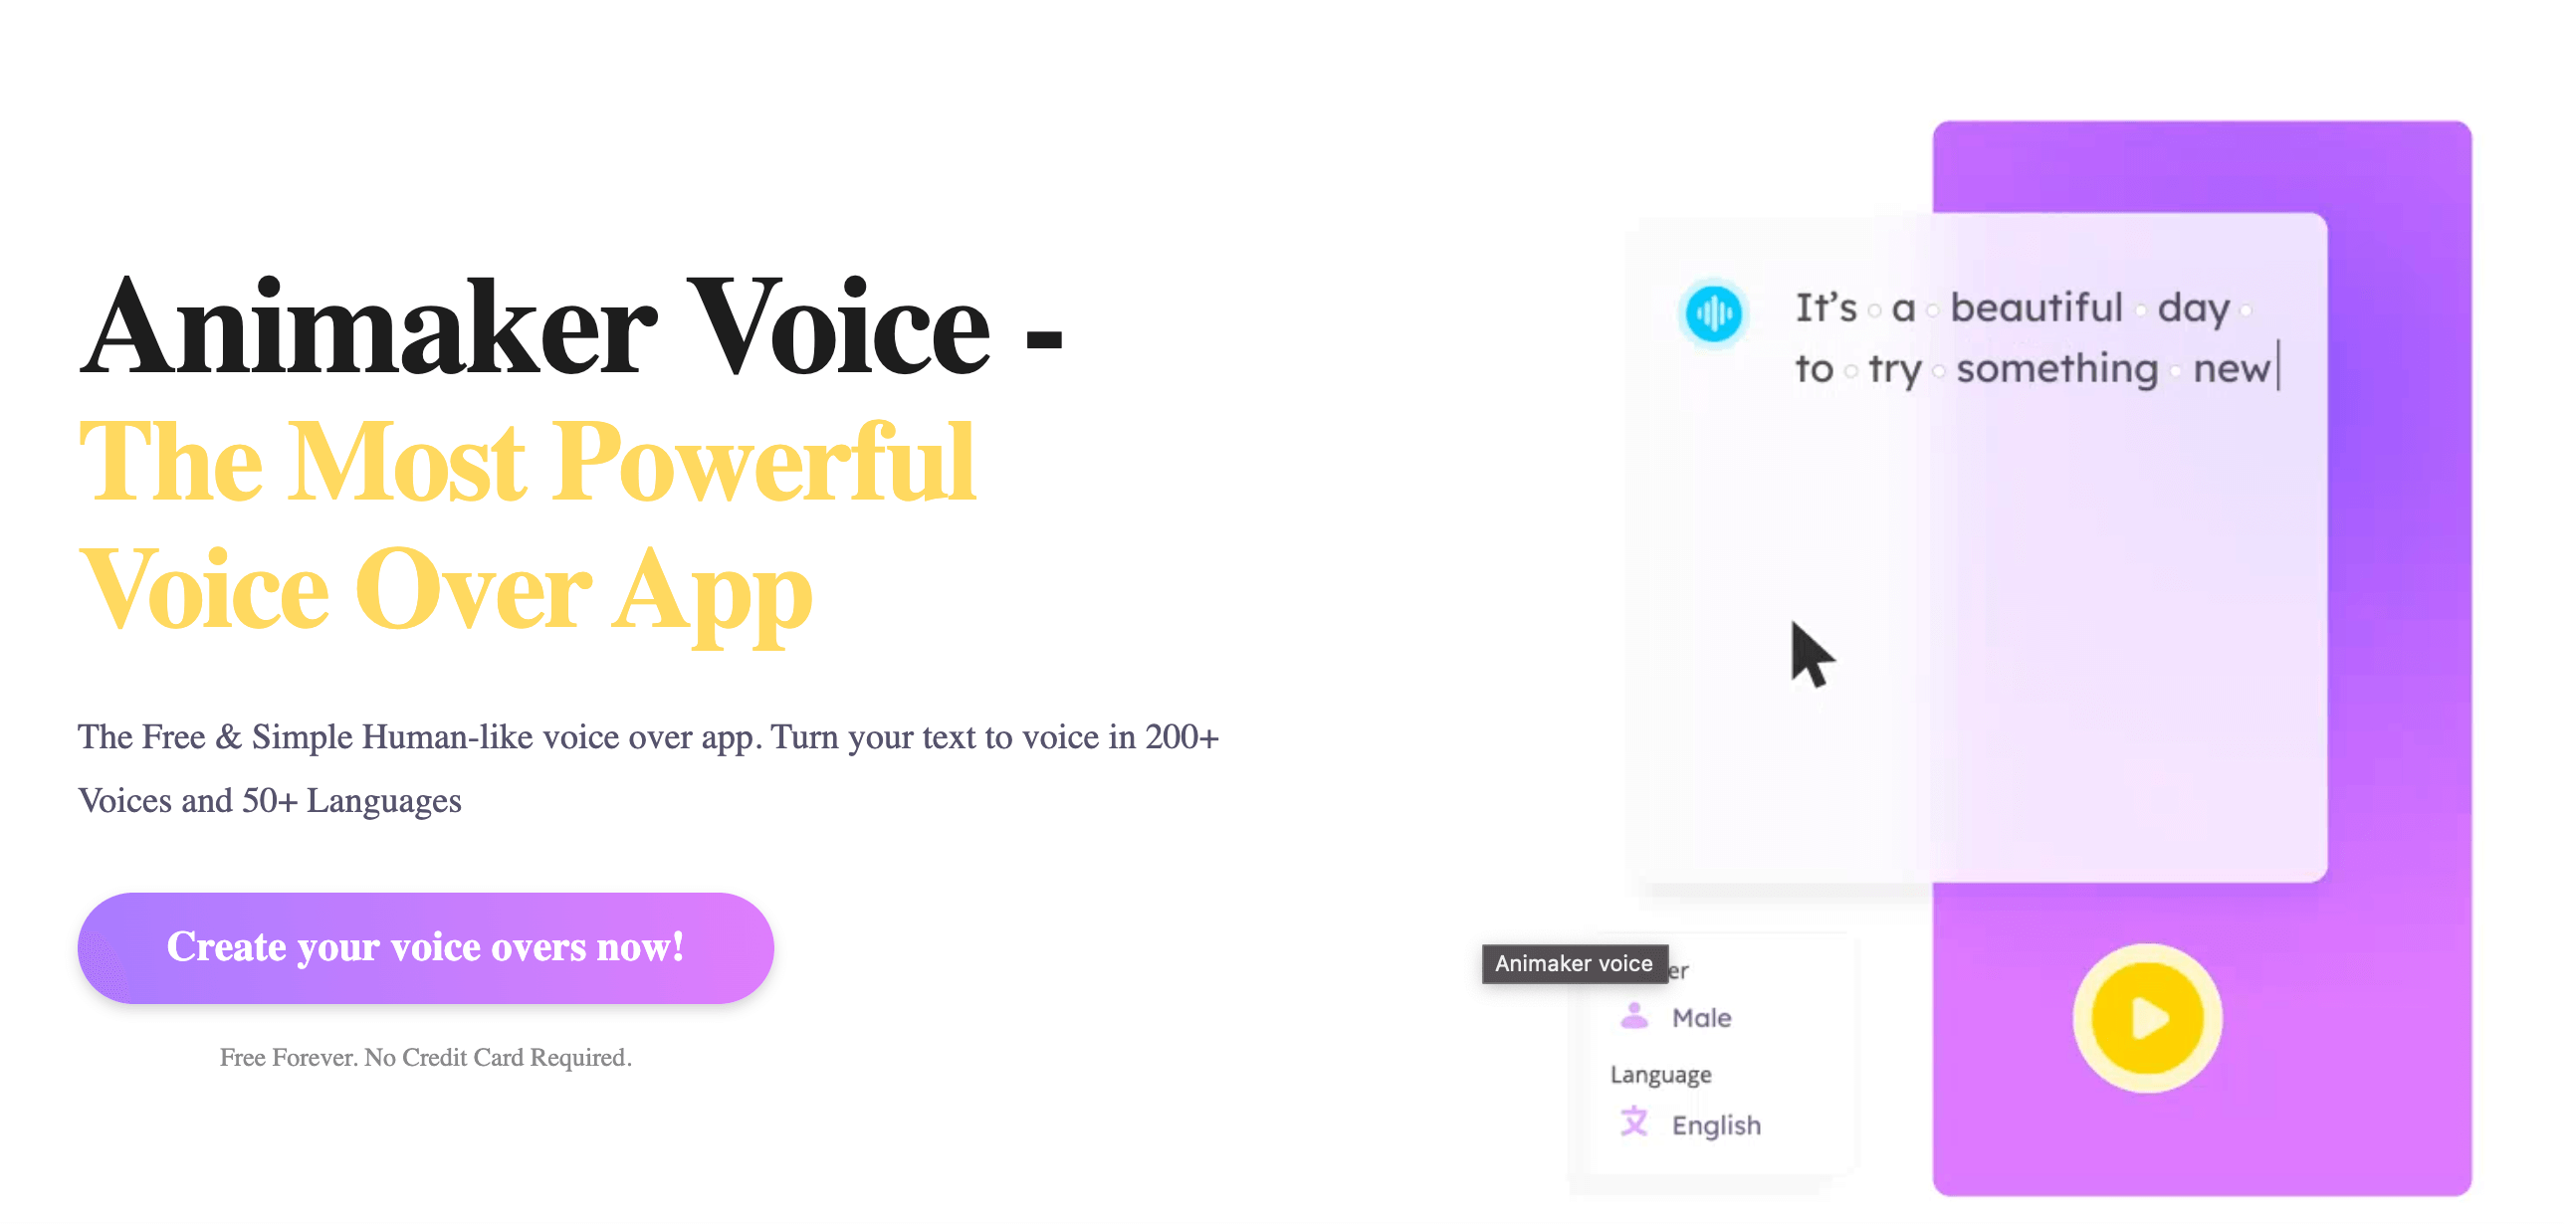 Animaker Voice Review - One Stop Solution For All Voice Generation